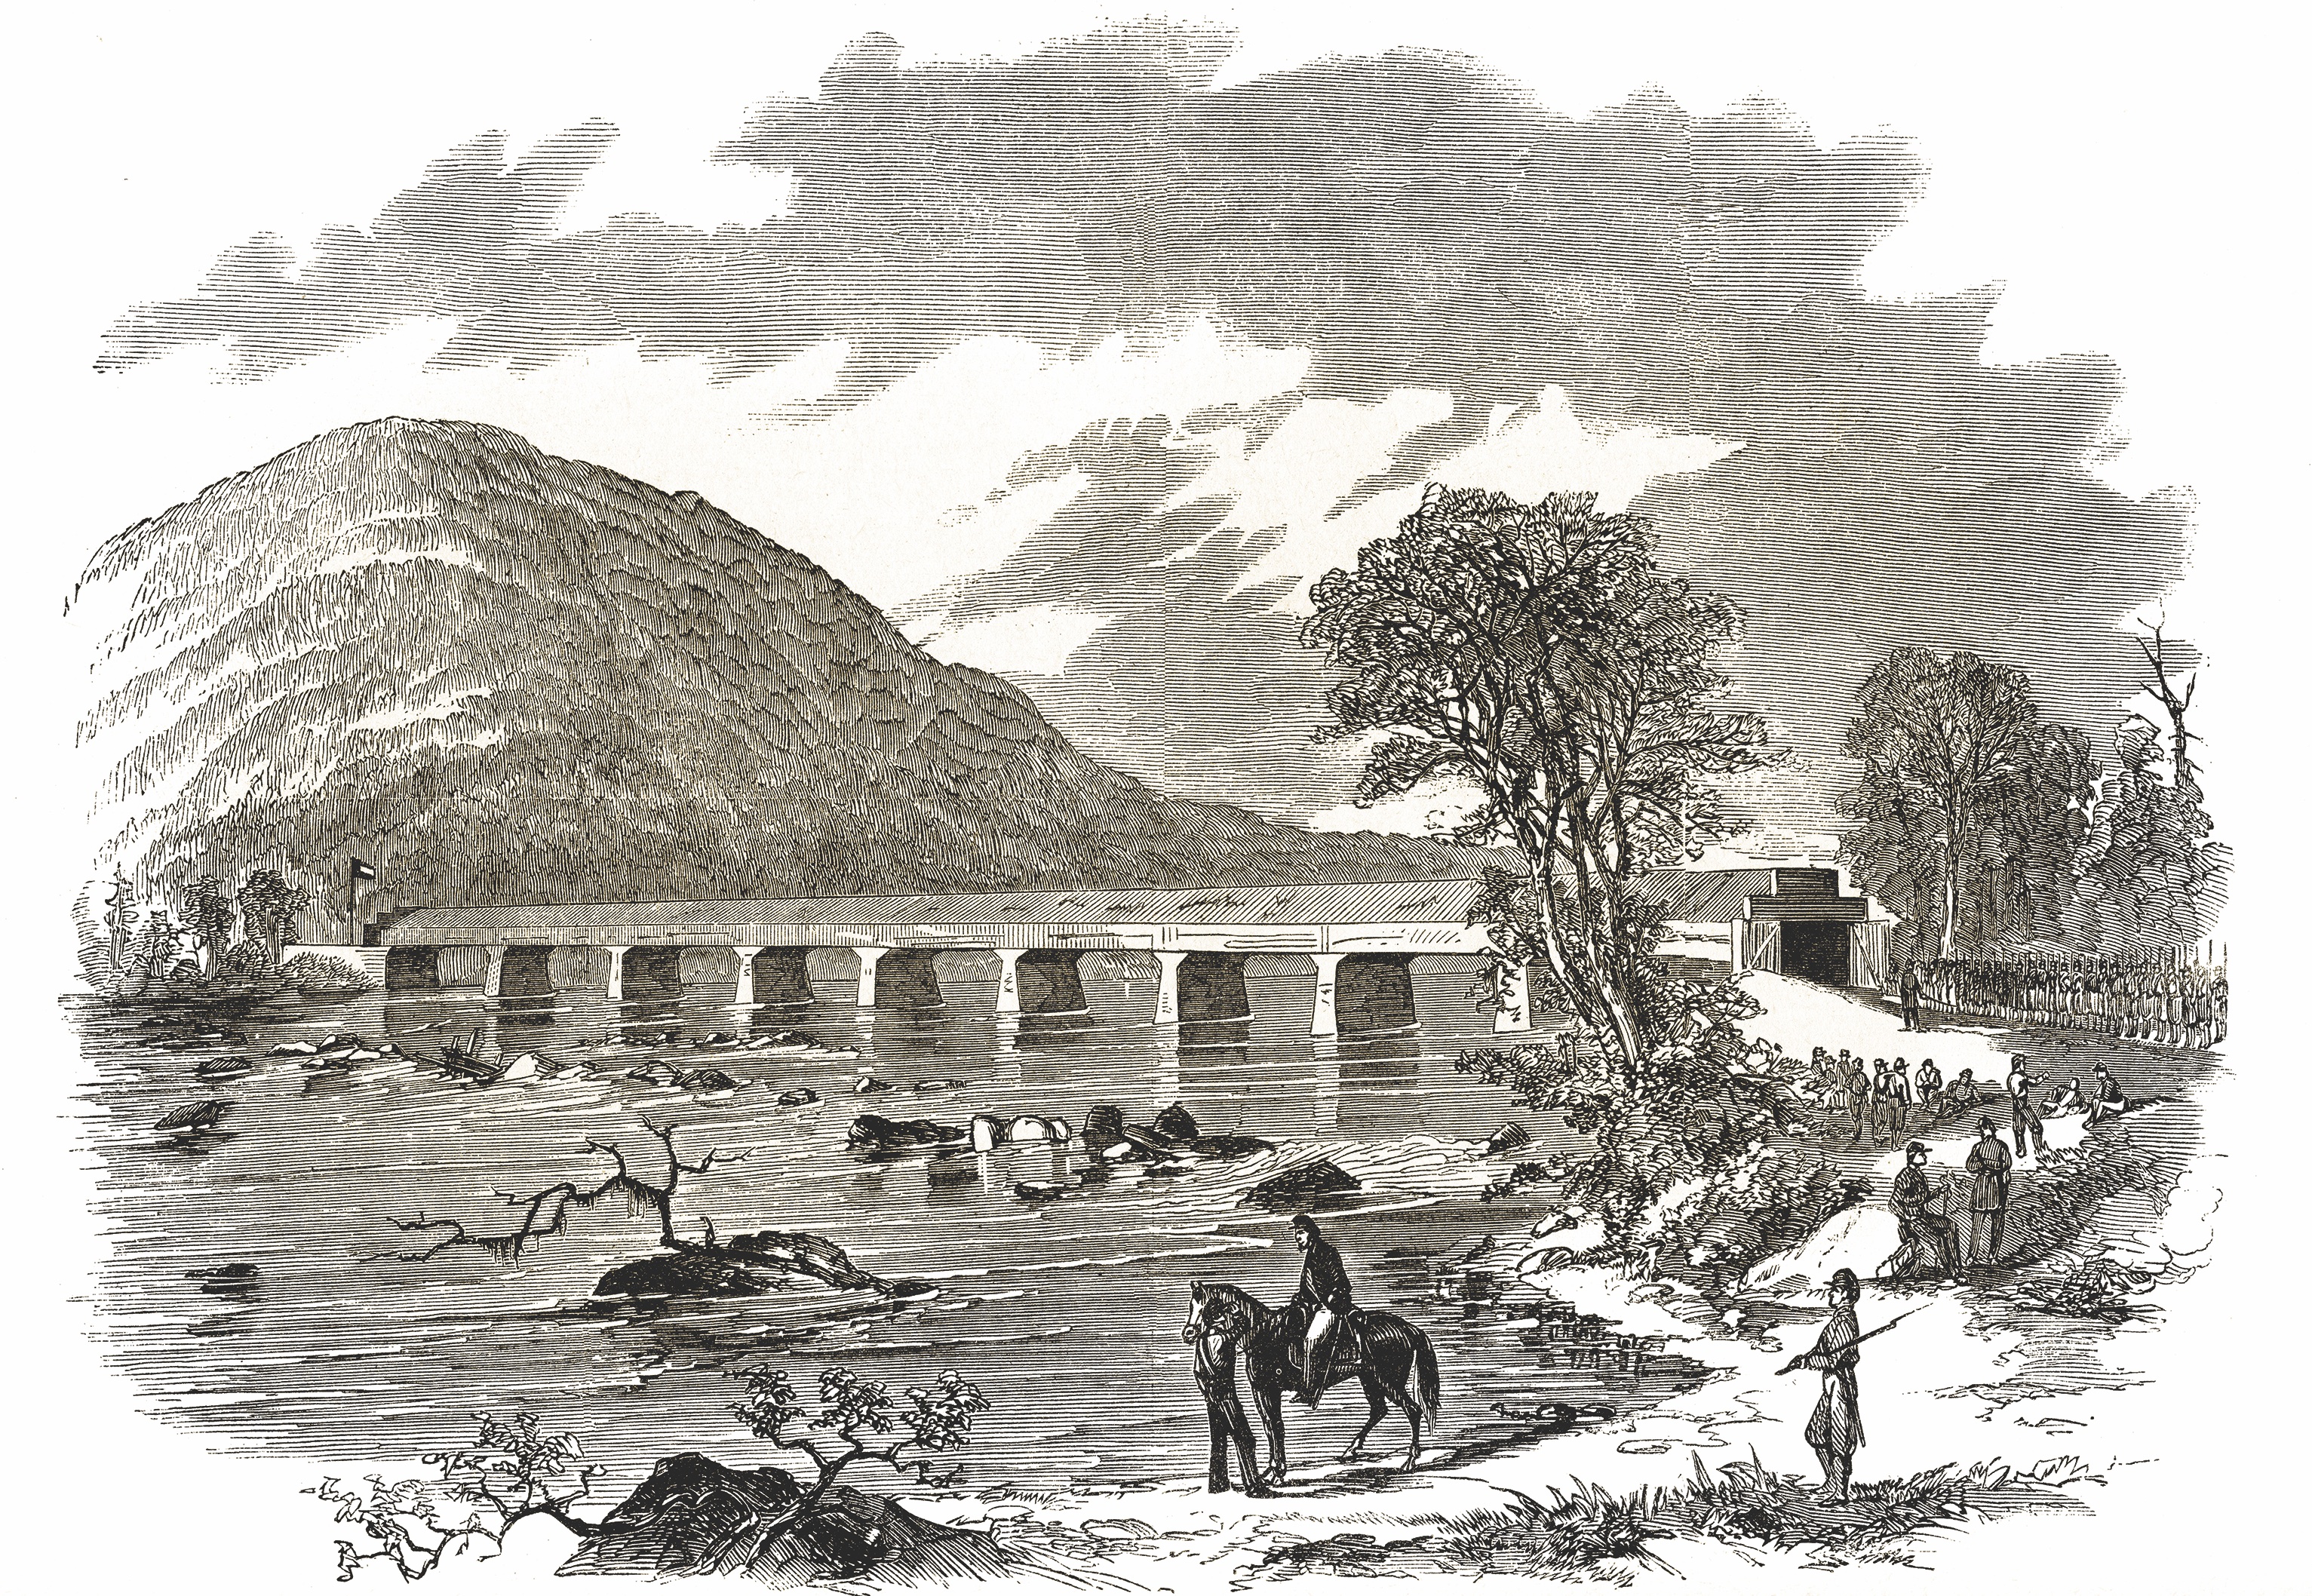 Union soldiers on the Maryland shore at Point of Rocks eye up a Confederate flag flying in Loudoun County, Va. The bridge was burned on June 14, 1861. (Harper's Ferry Weekly)